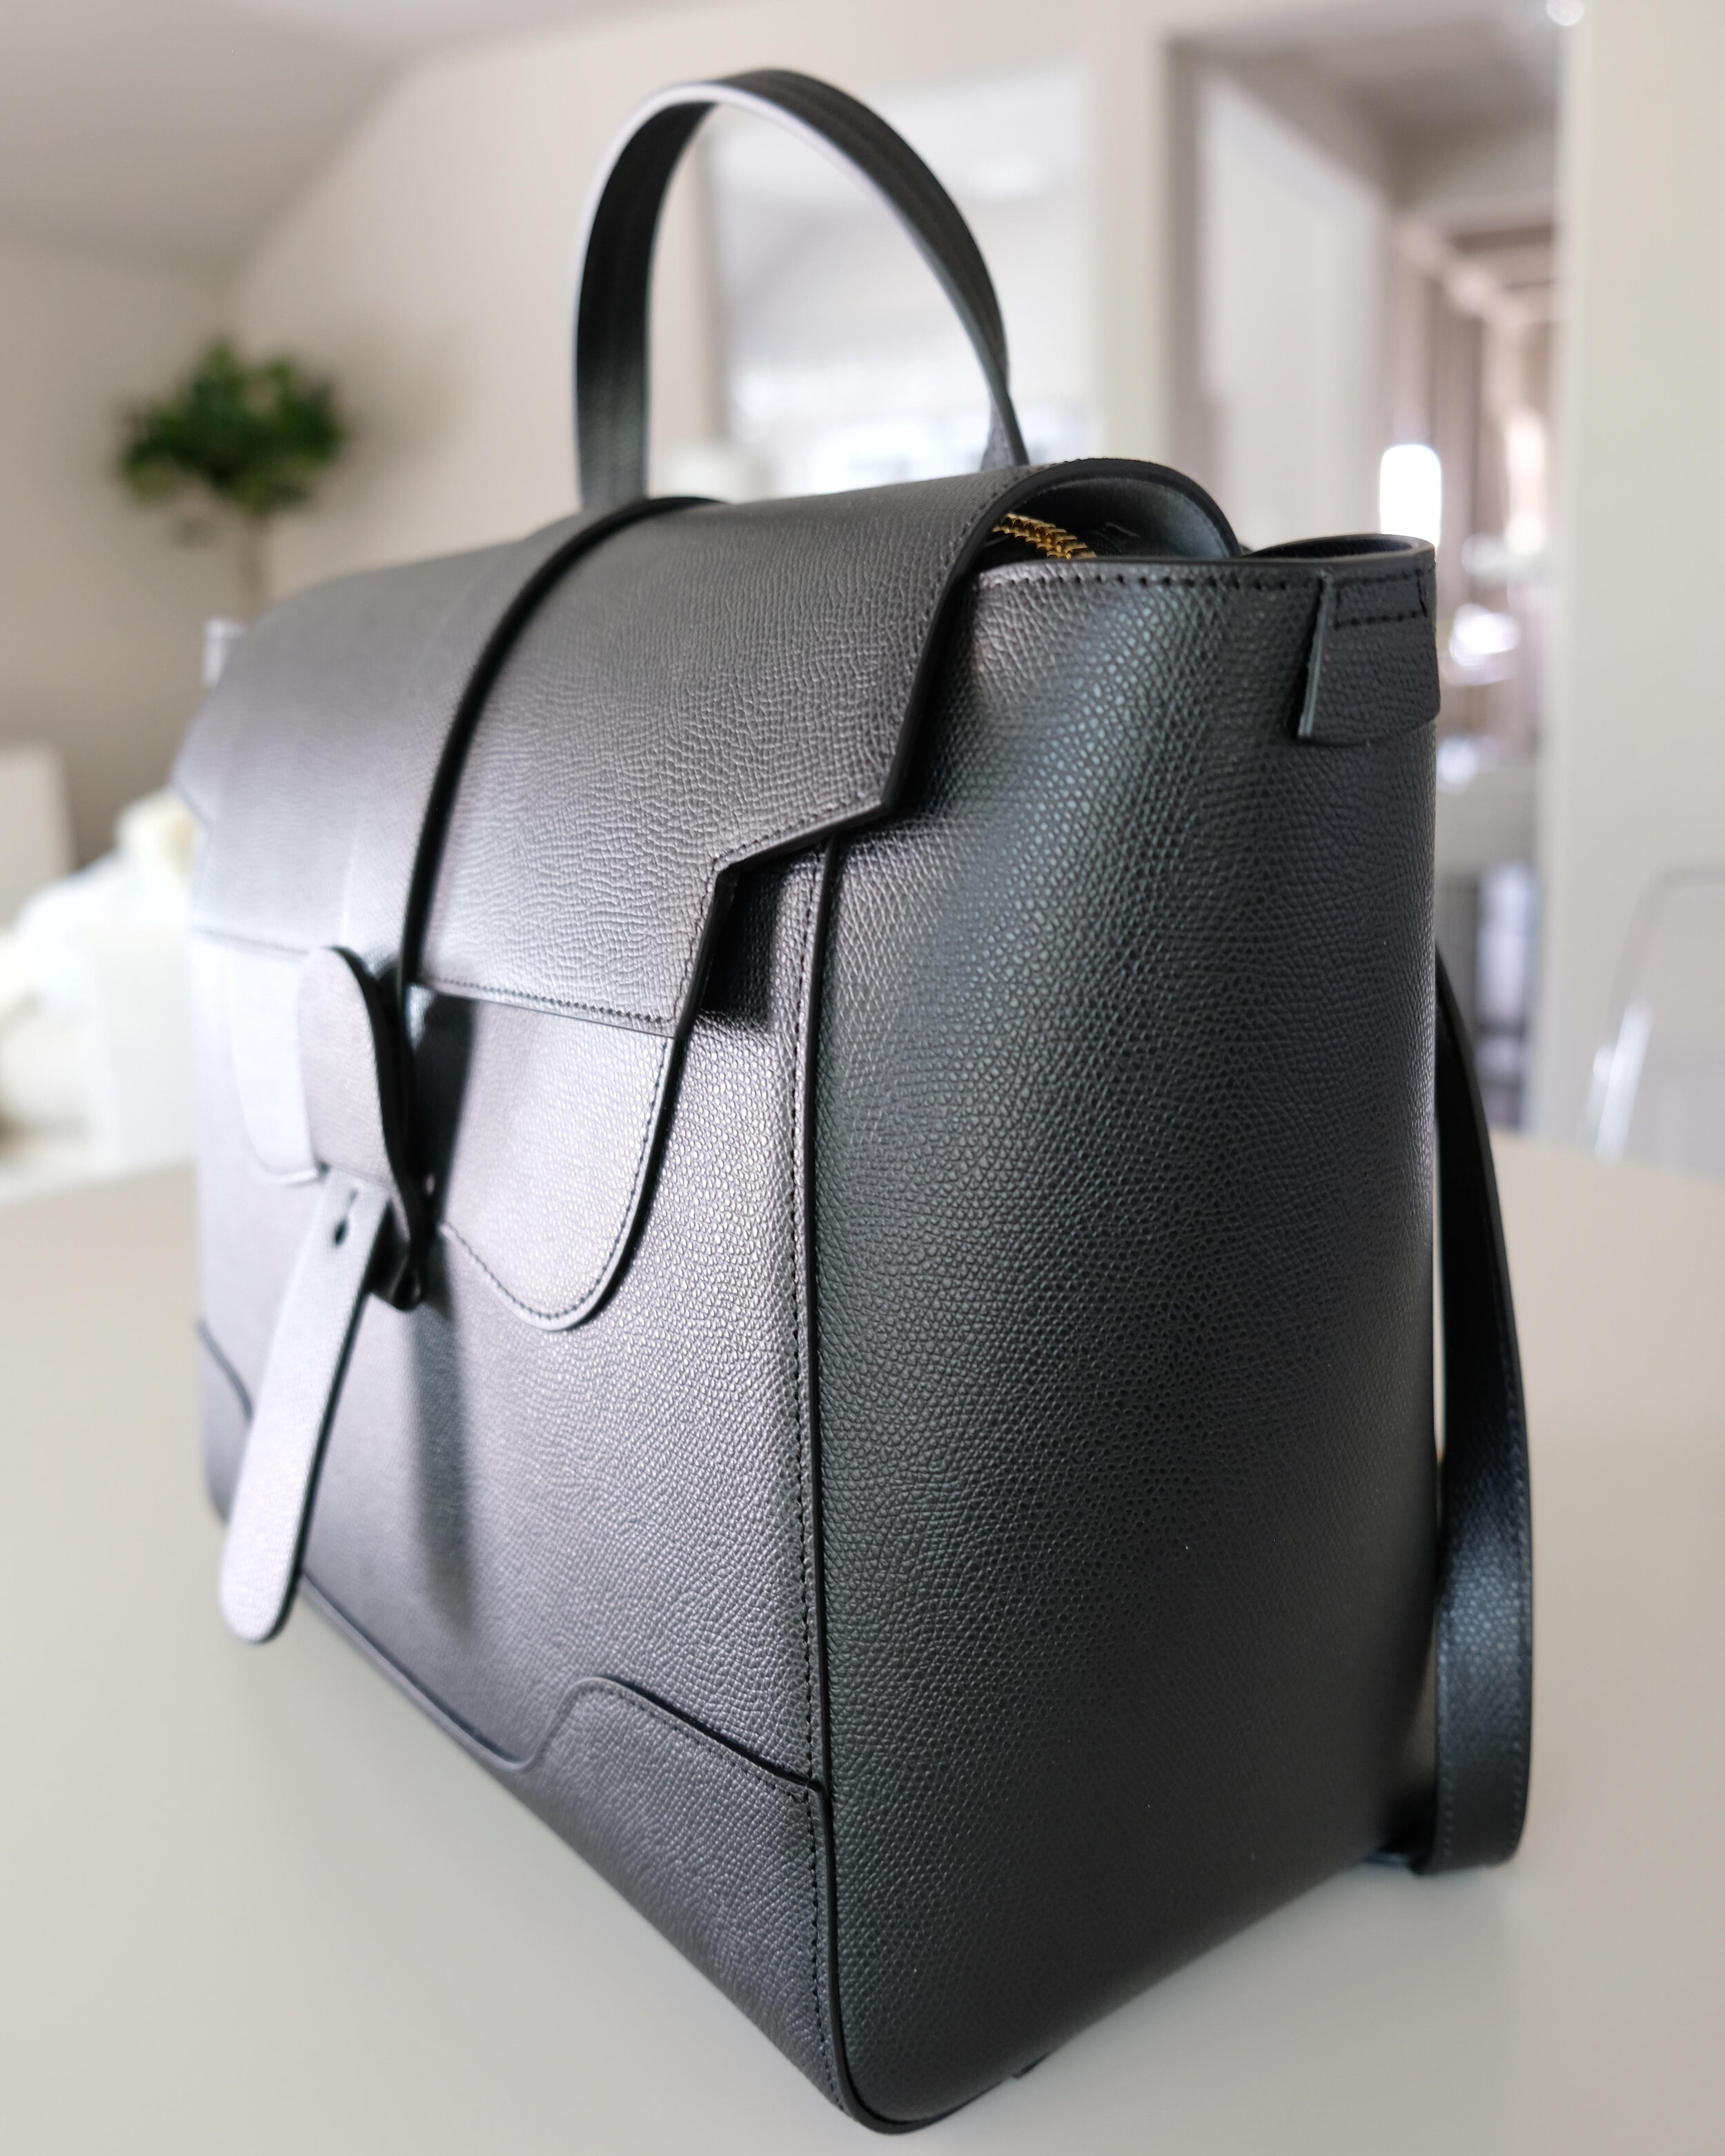 Is the Senreve Maestra Bag Worth the Investment?, LMents of Style